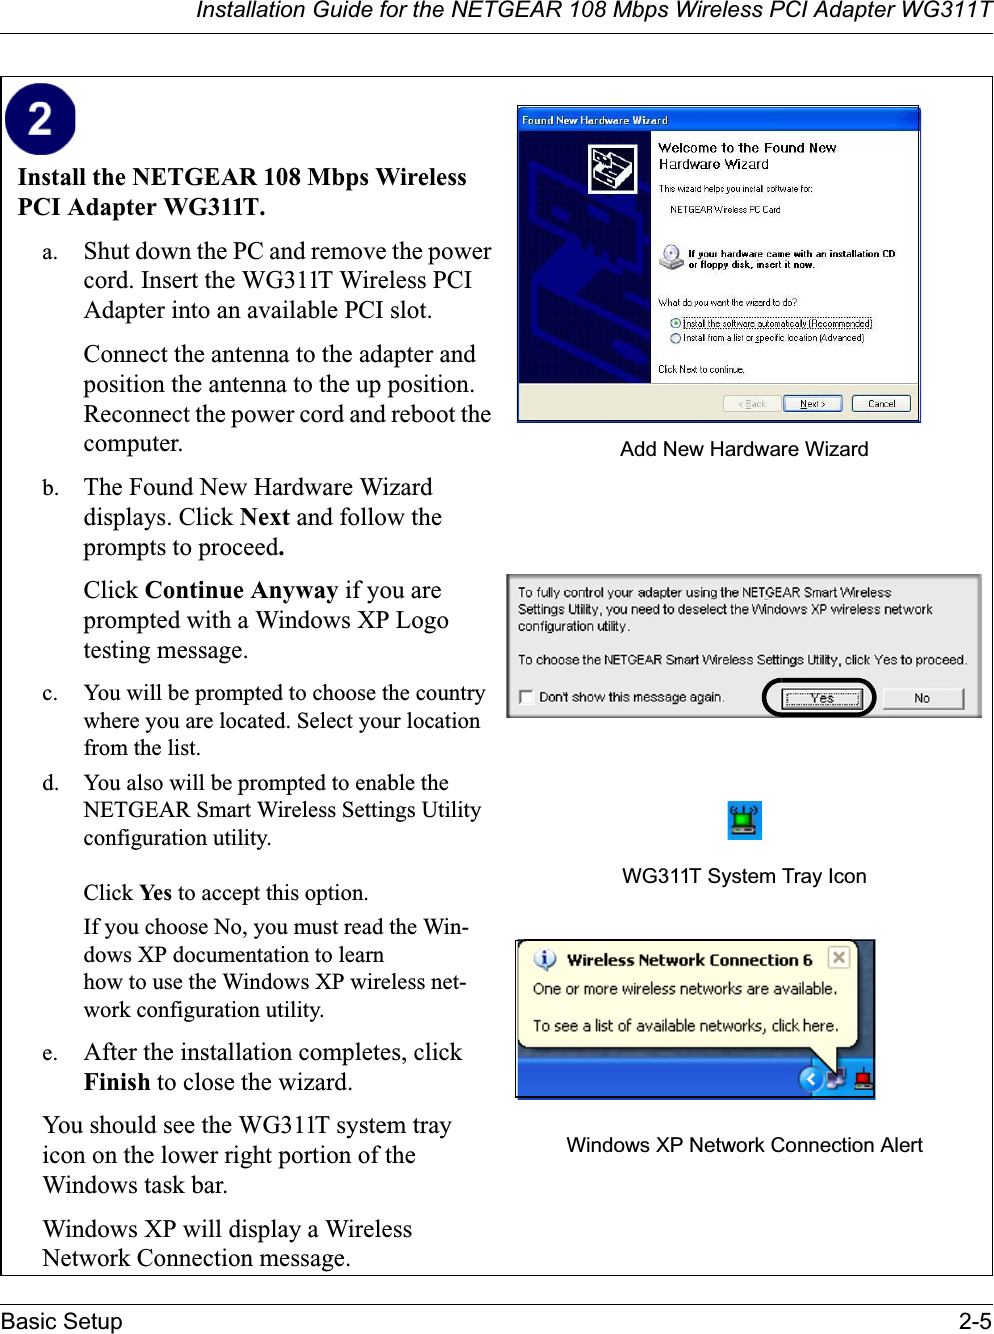 Installation Guide for the NETGEAR 108 Mbps Wireless PCI Adapter WG311TBasic Setup 2-5Install the NETGEAR 108 Mbps Wireless PCI Adapter WG311T. a. Shut down the PC and remove the power cord. Insert the WG311T Wireless PCI Adapter into an available PCI slot.Connect the antenna to the adapter and position the antenna to the up position. Reconnect the power cord and reboot the computer.b. The Found New Hardware Wizard displays. Click Next and follow the prompts to proceed.Click Continue Anyway if you are prompted with a Windows XP Logo testing message.c. You will be prompted to choose the country where you are located. Select your location from the list.d. You also will be prompted to enable the NETGEAR Smart Wireless Settings Utility configuration utility. Click Yes to accept this option. If you choose No, you must read the Win-dows XP documentation to learn how to use the Windows XP wireless net-work configuration utility.e. After the installation completes, click Finish to close the wizard.You should see the WG311T system tray icon on the lower right portion of the Windows task bar.Windows XP will display a Wireless Network Connection message.Add New Hardware WizardWG311T System Tray IconWindows XP Network Connection Alert